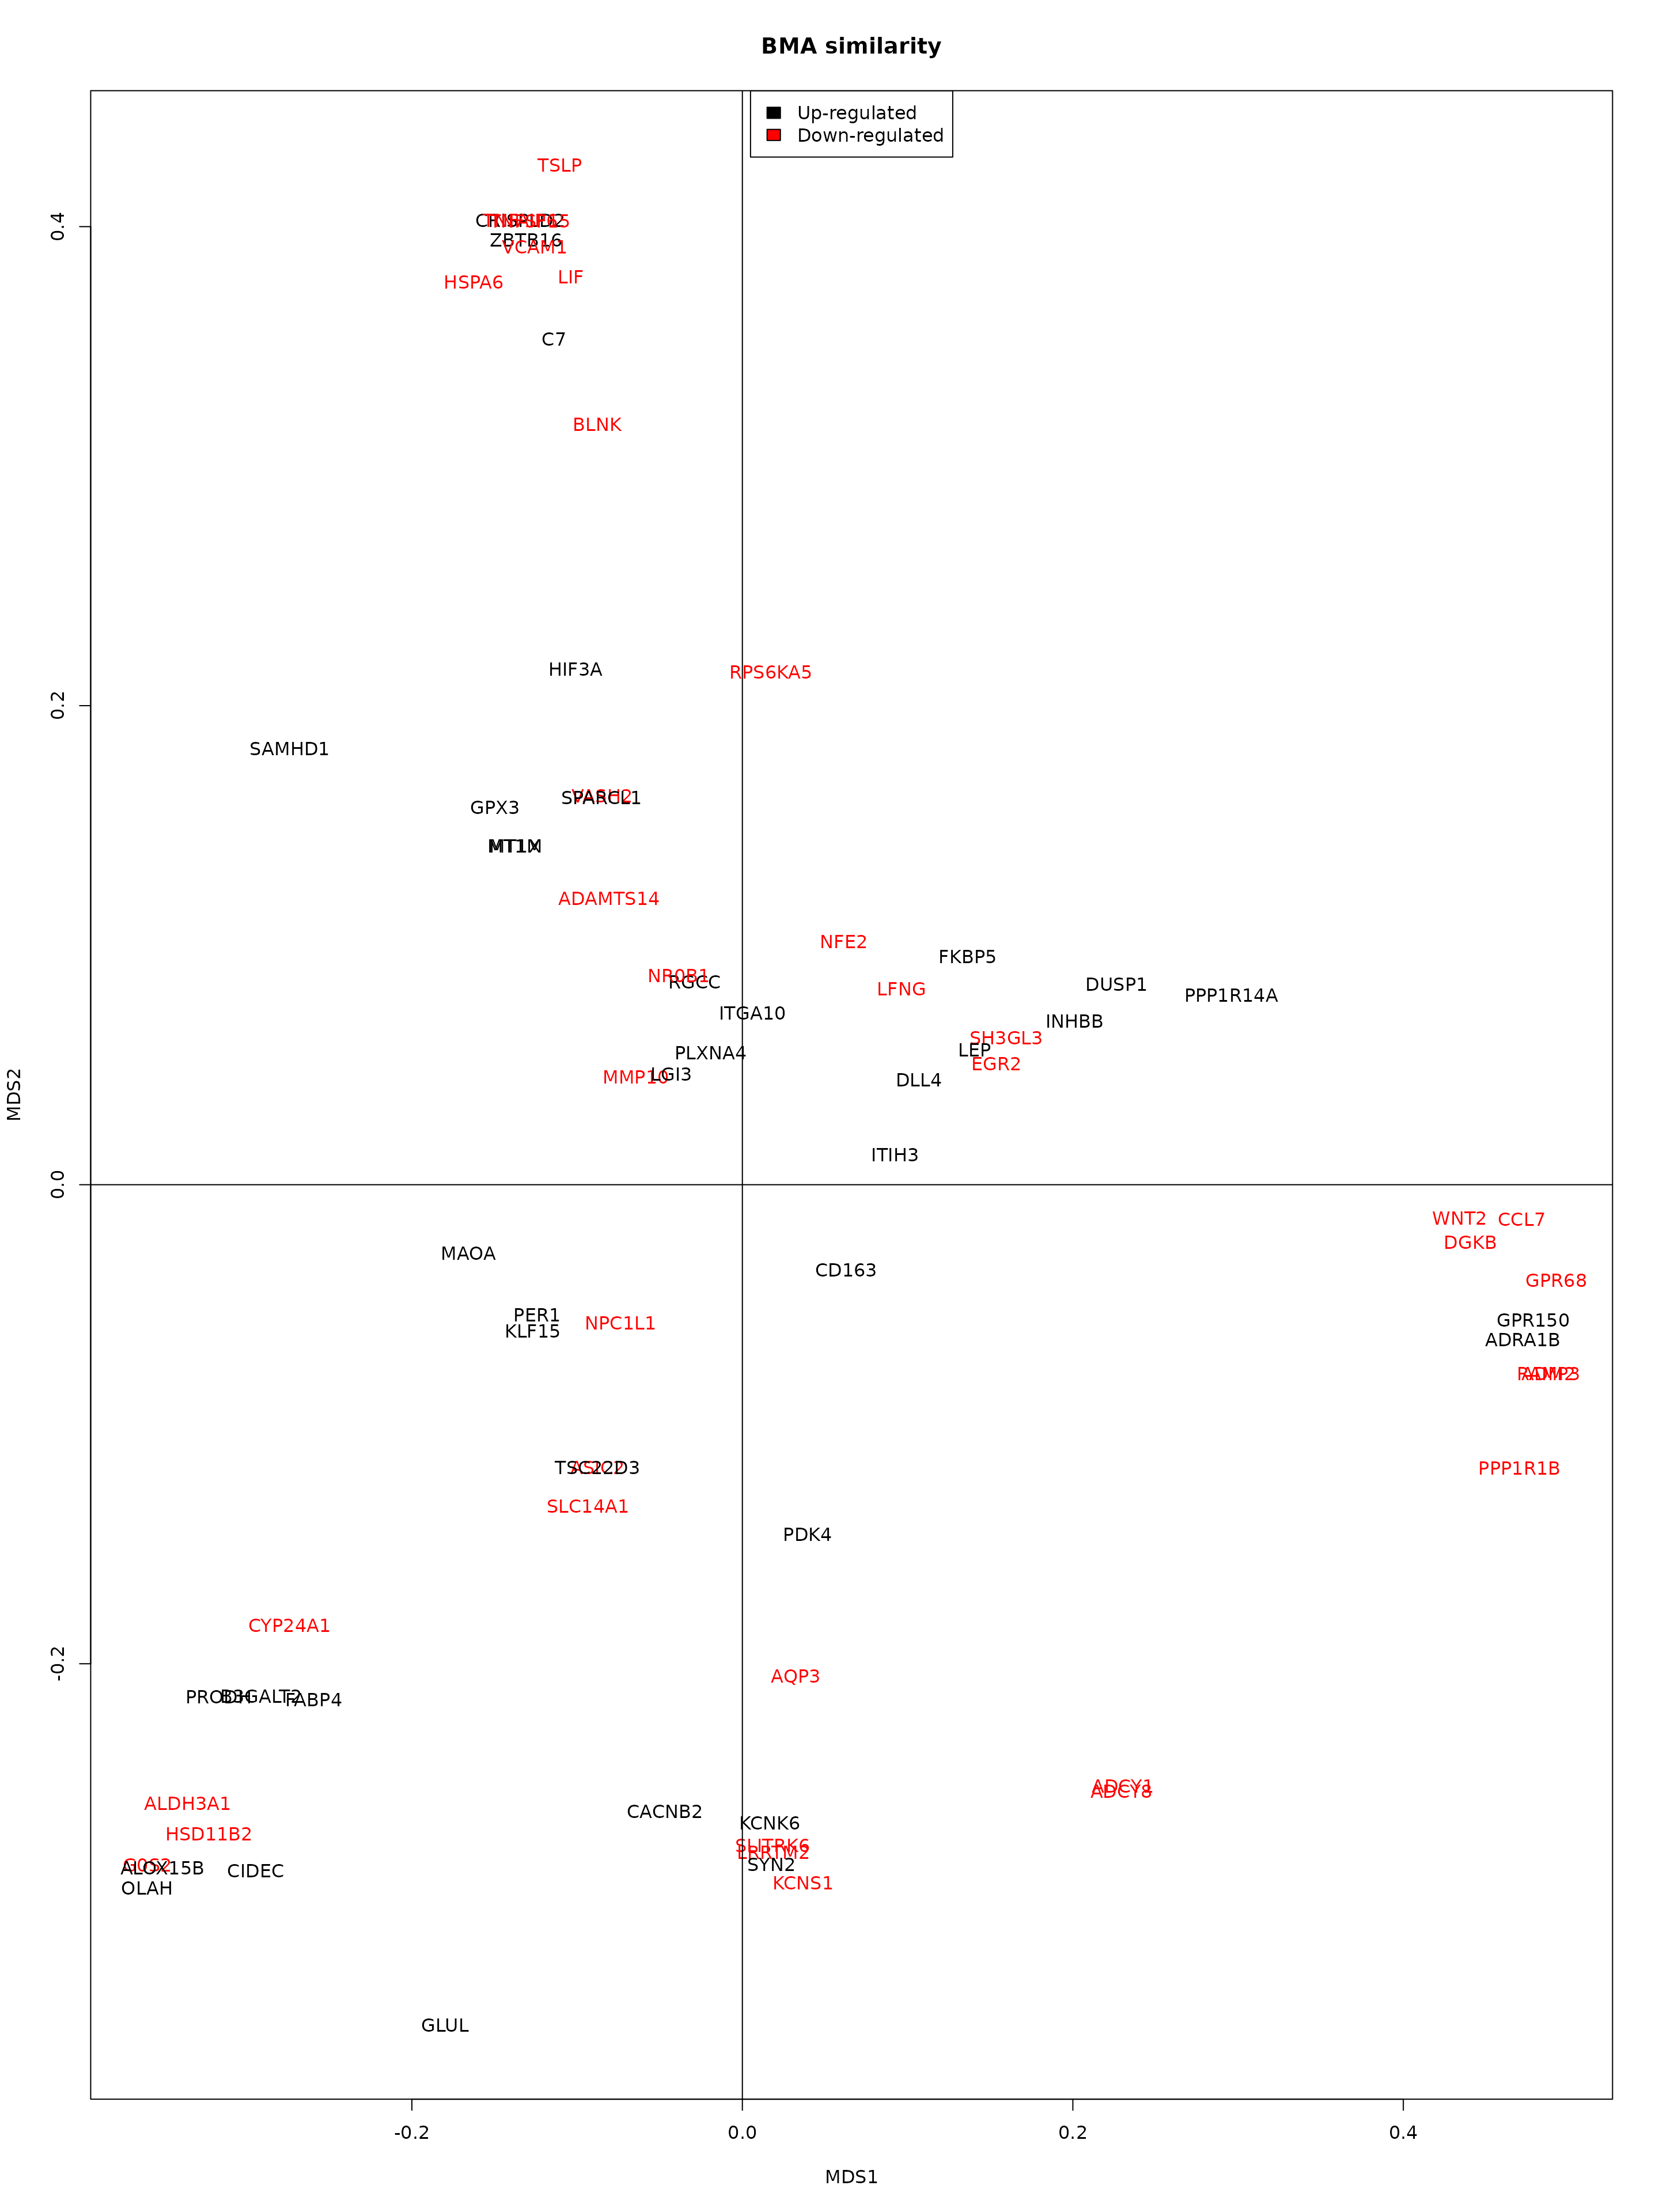 First two dimensions of a multi dimensional scaling method based on the similarity of genes. Colored if the fold change is above 2.5 (red).